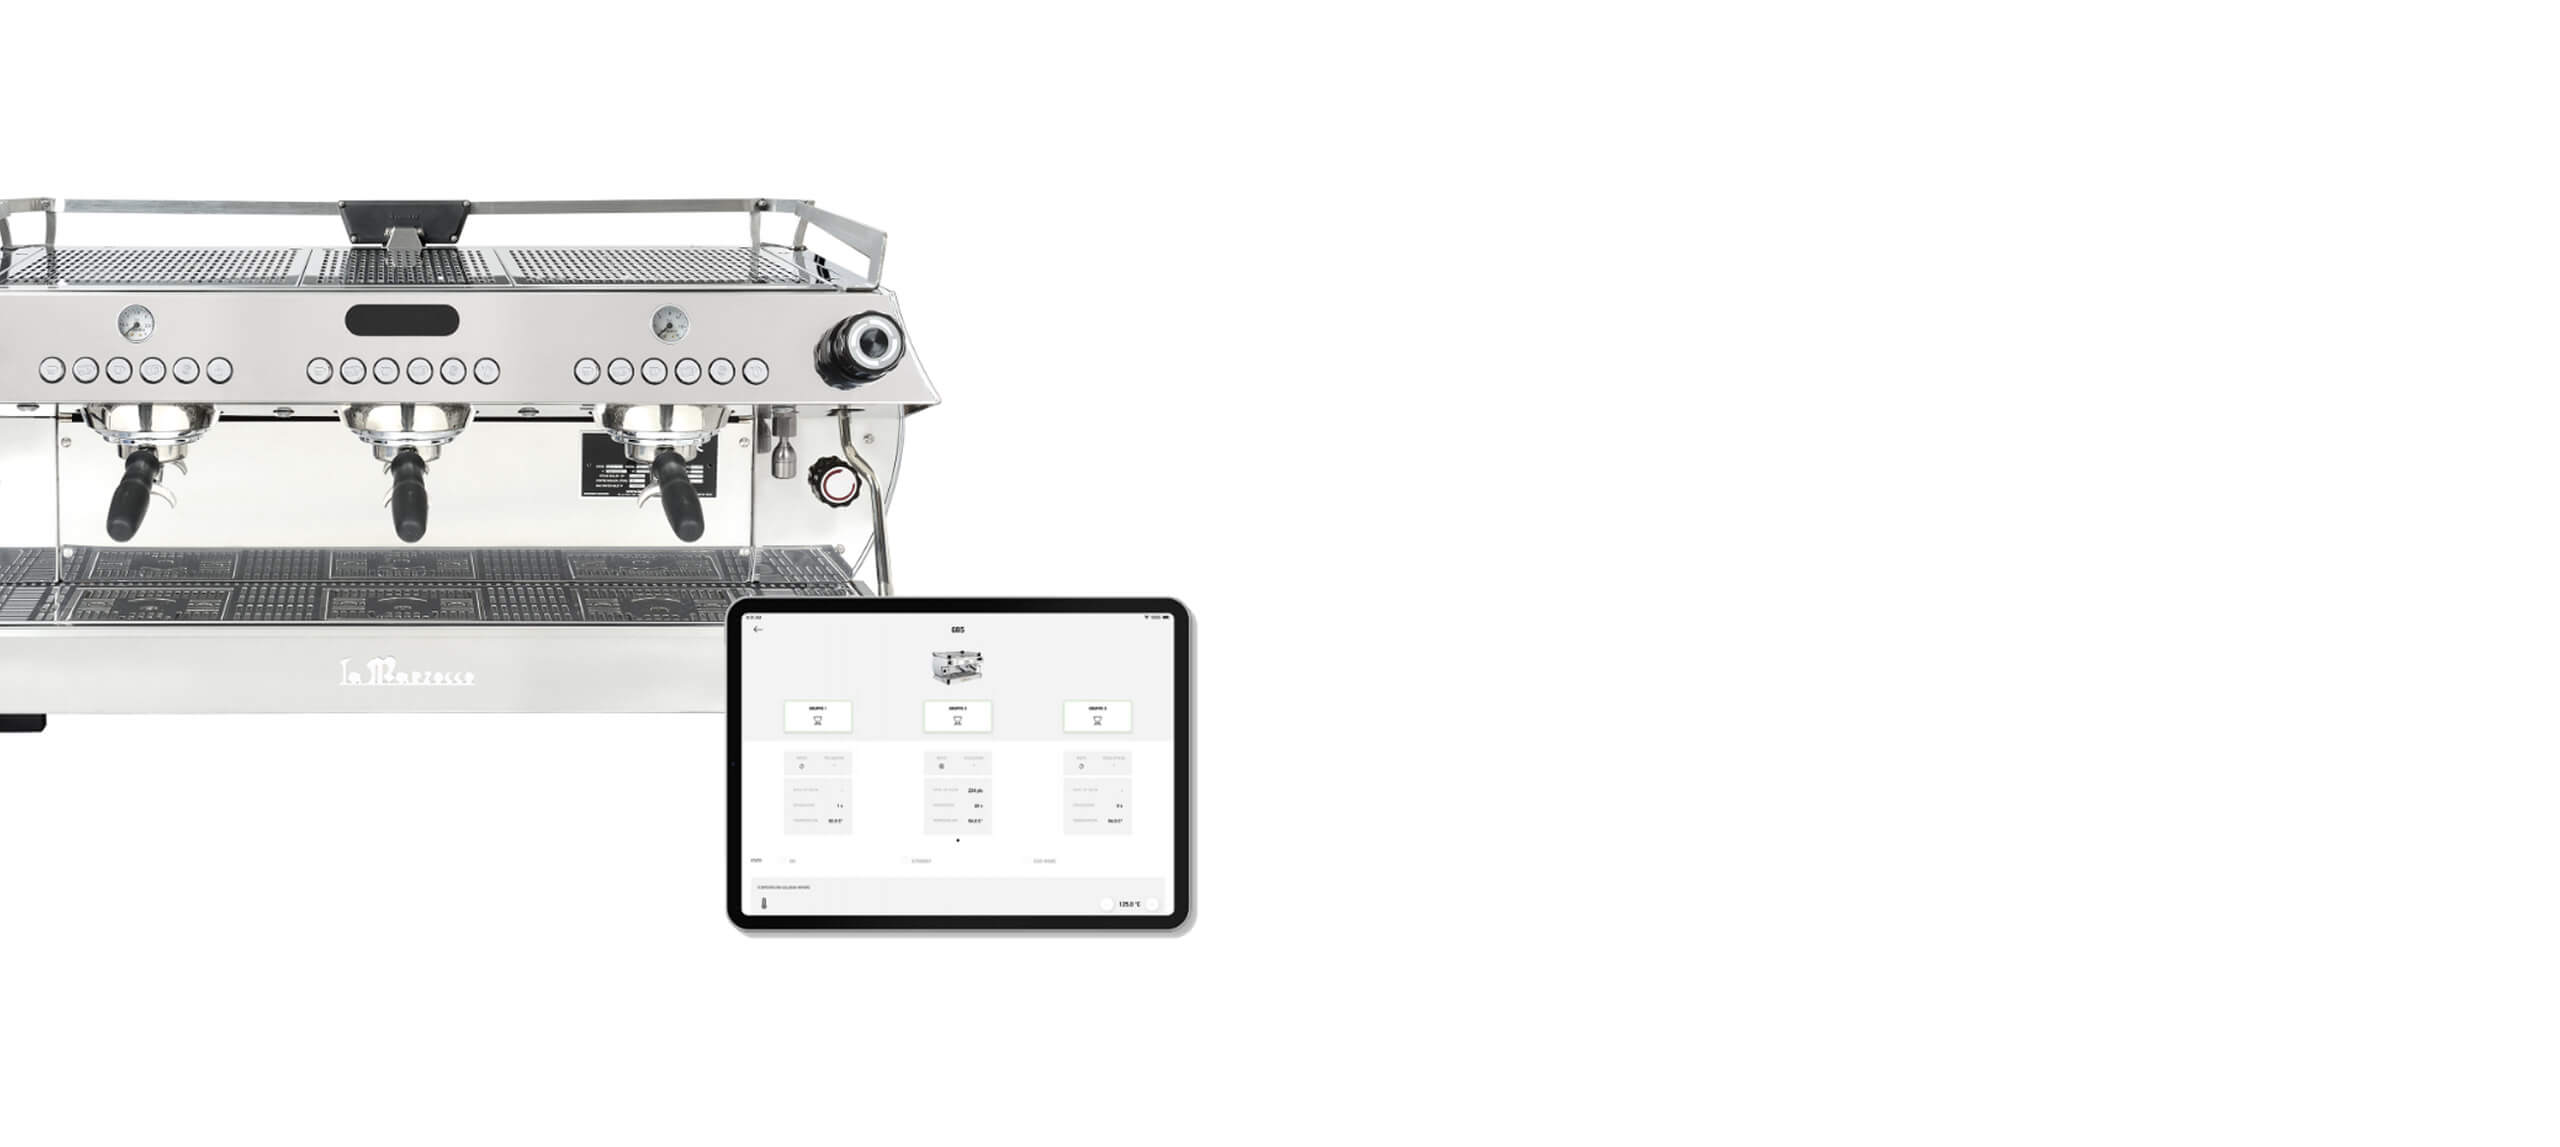 The app works well on an iPad - La Marzocco NZ